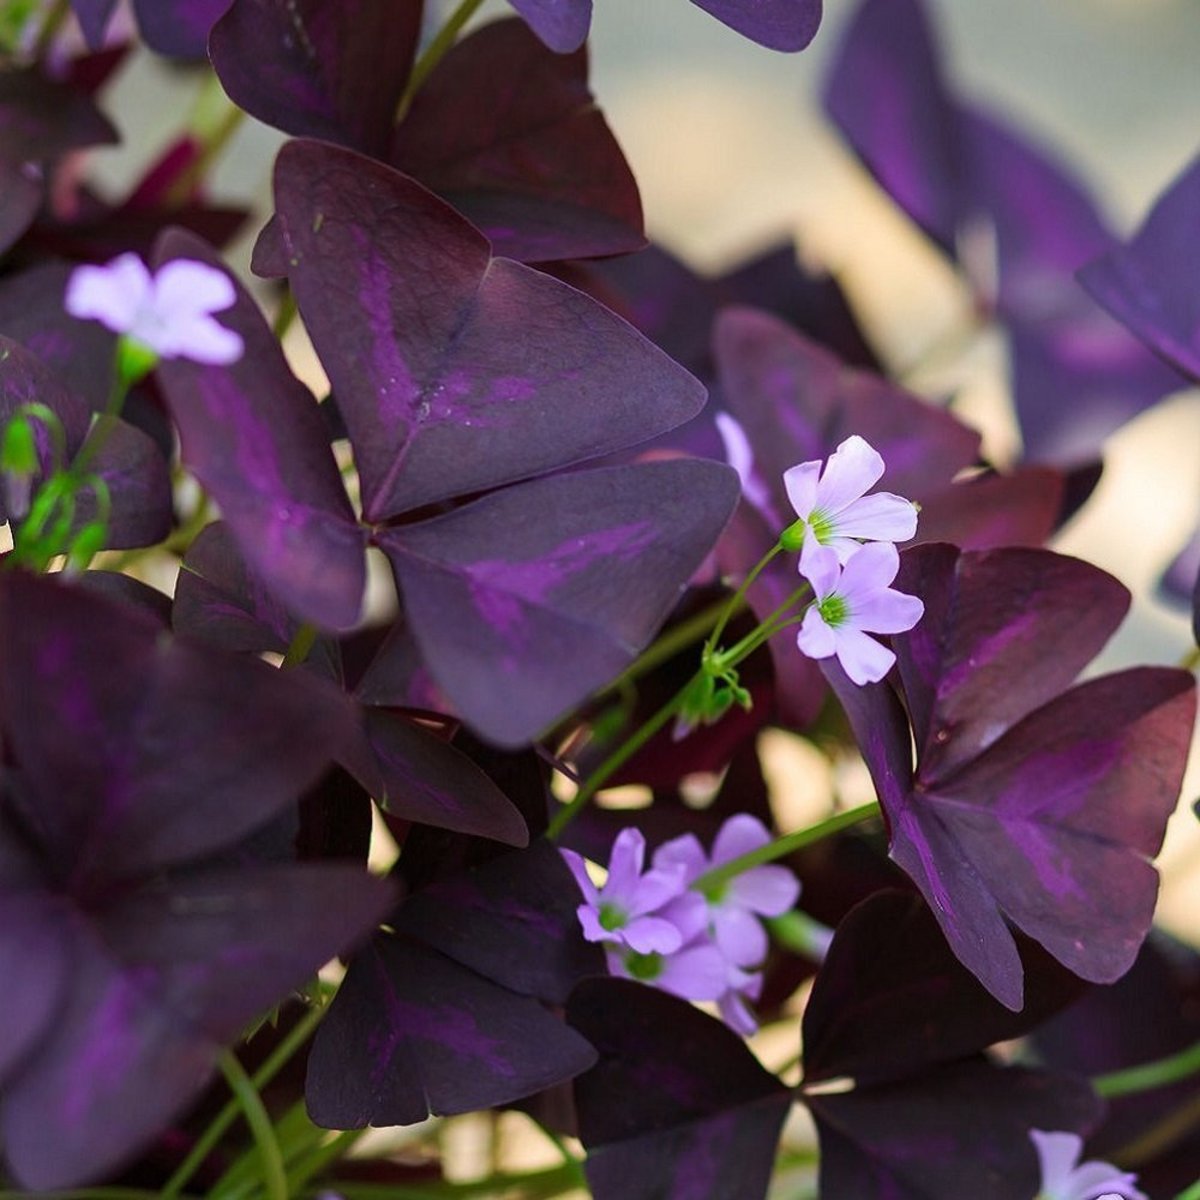 Lovely Purple Shamrocks – I have to get some of these.